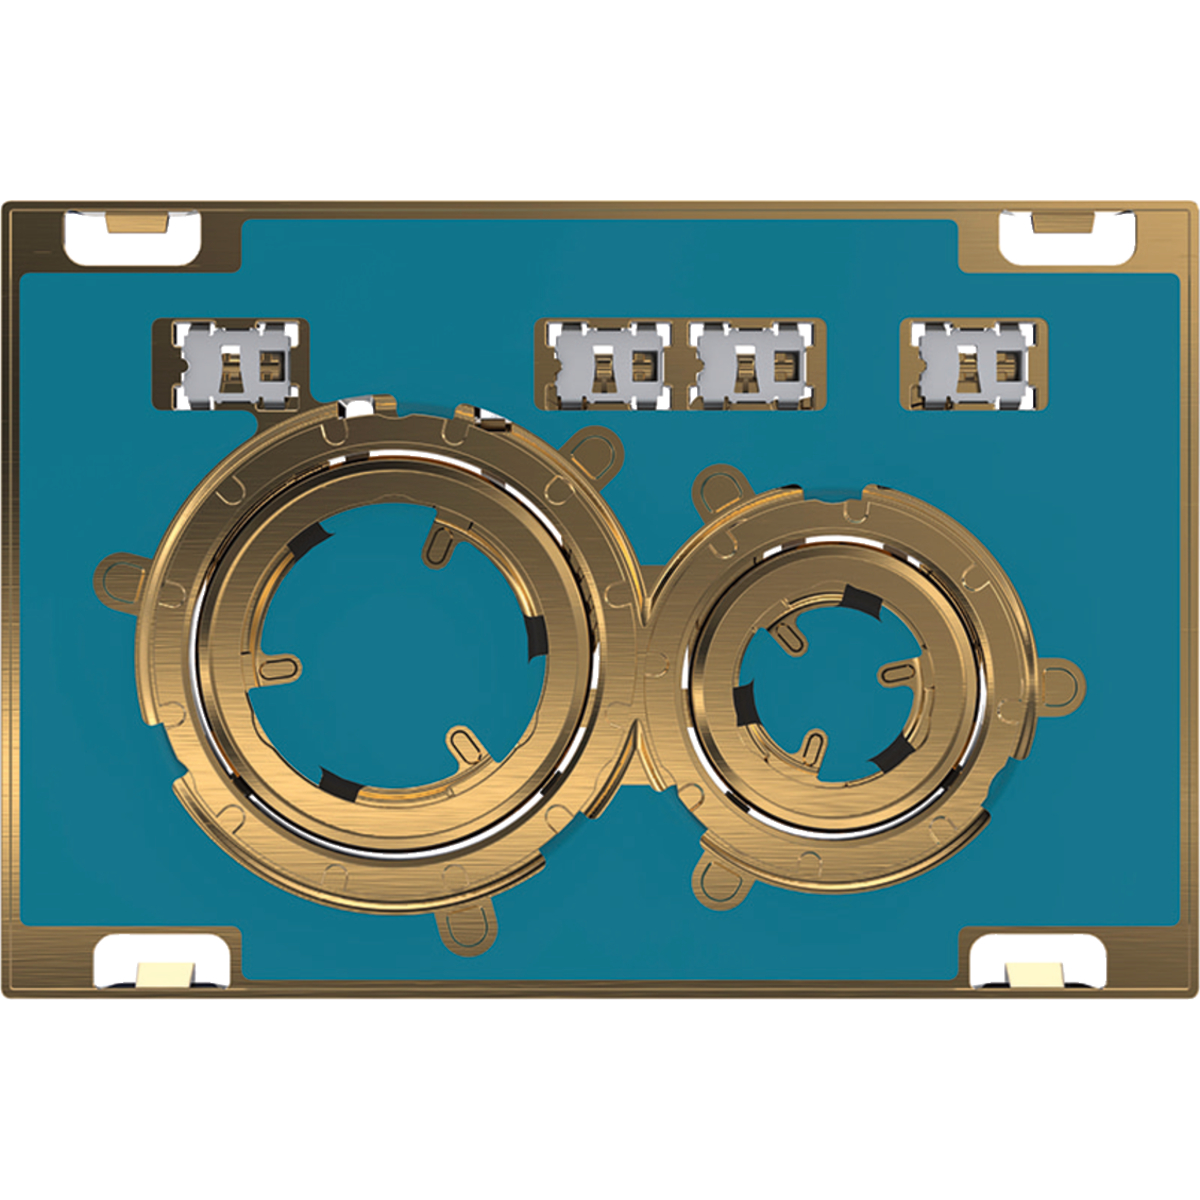 Geberit 115.652.00.1 Actuator Plate Sigma21 for Dual Flush, Metal Colour Brass - Brass / Customised